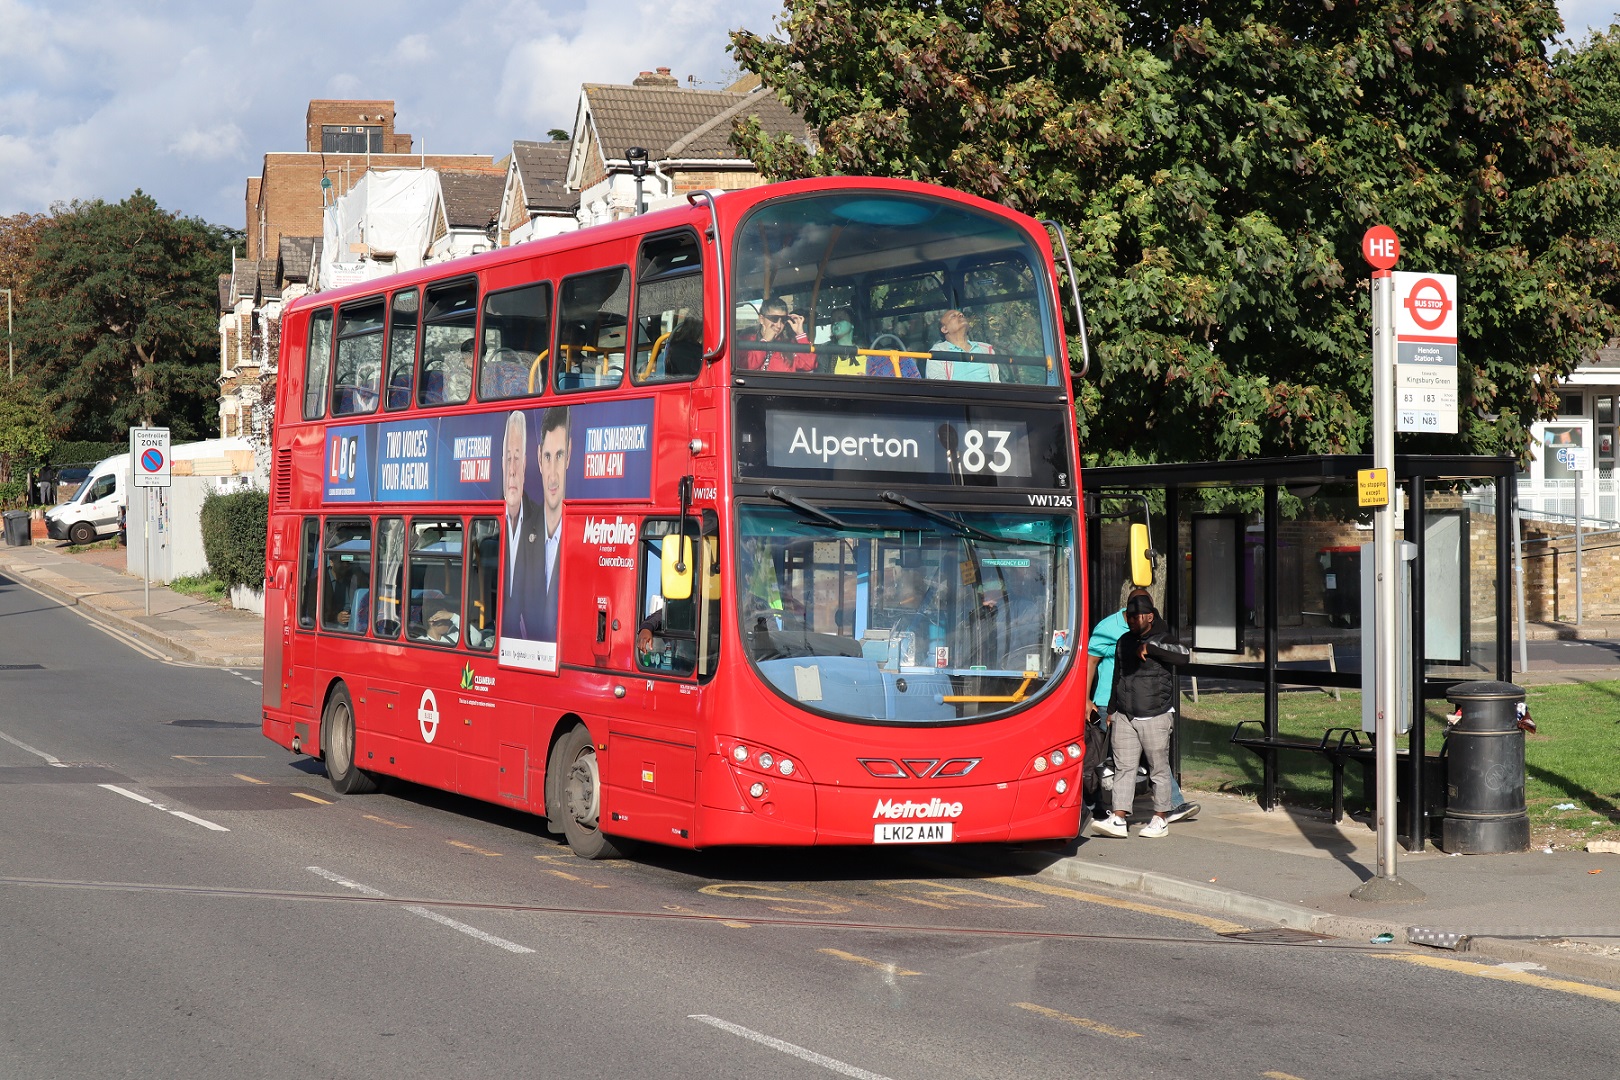 Metroline working with CitySwift to optimise running times